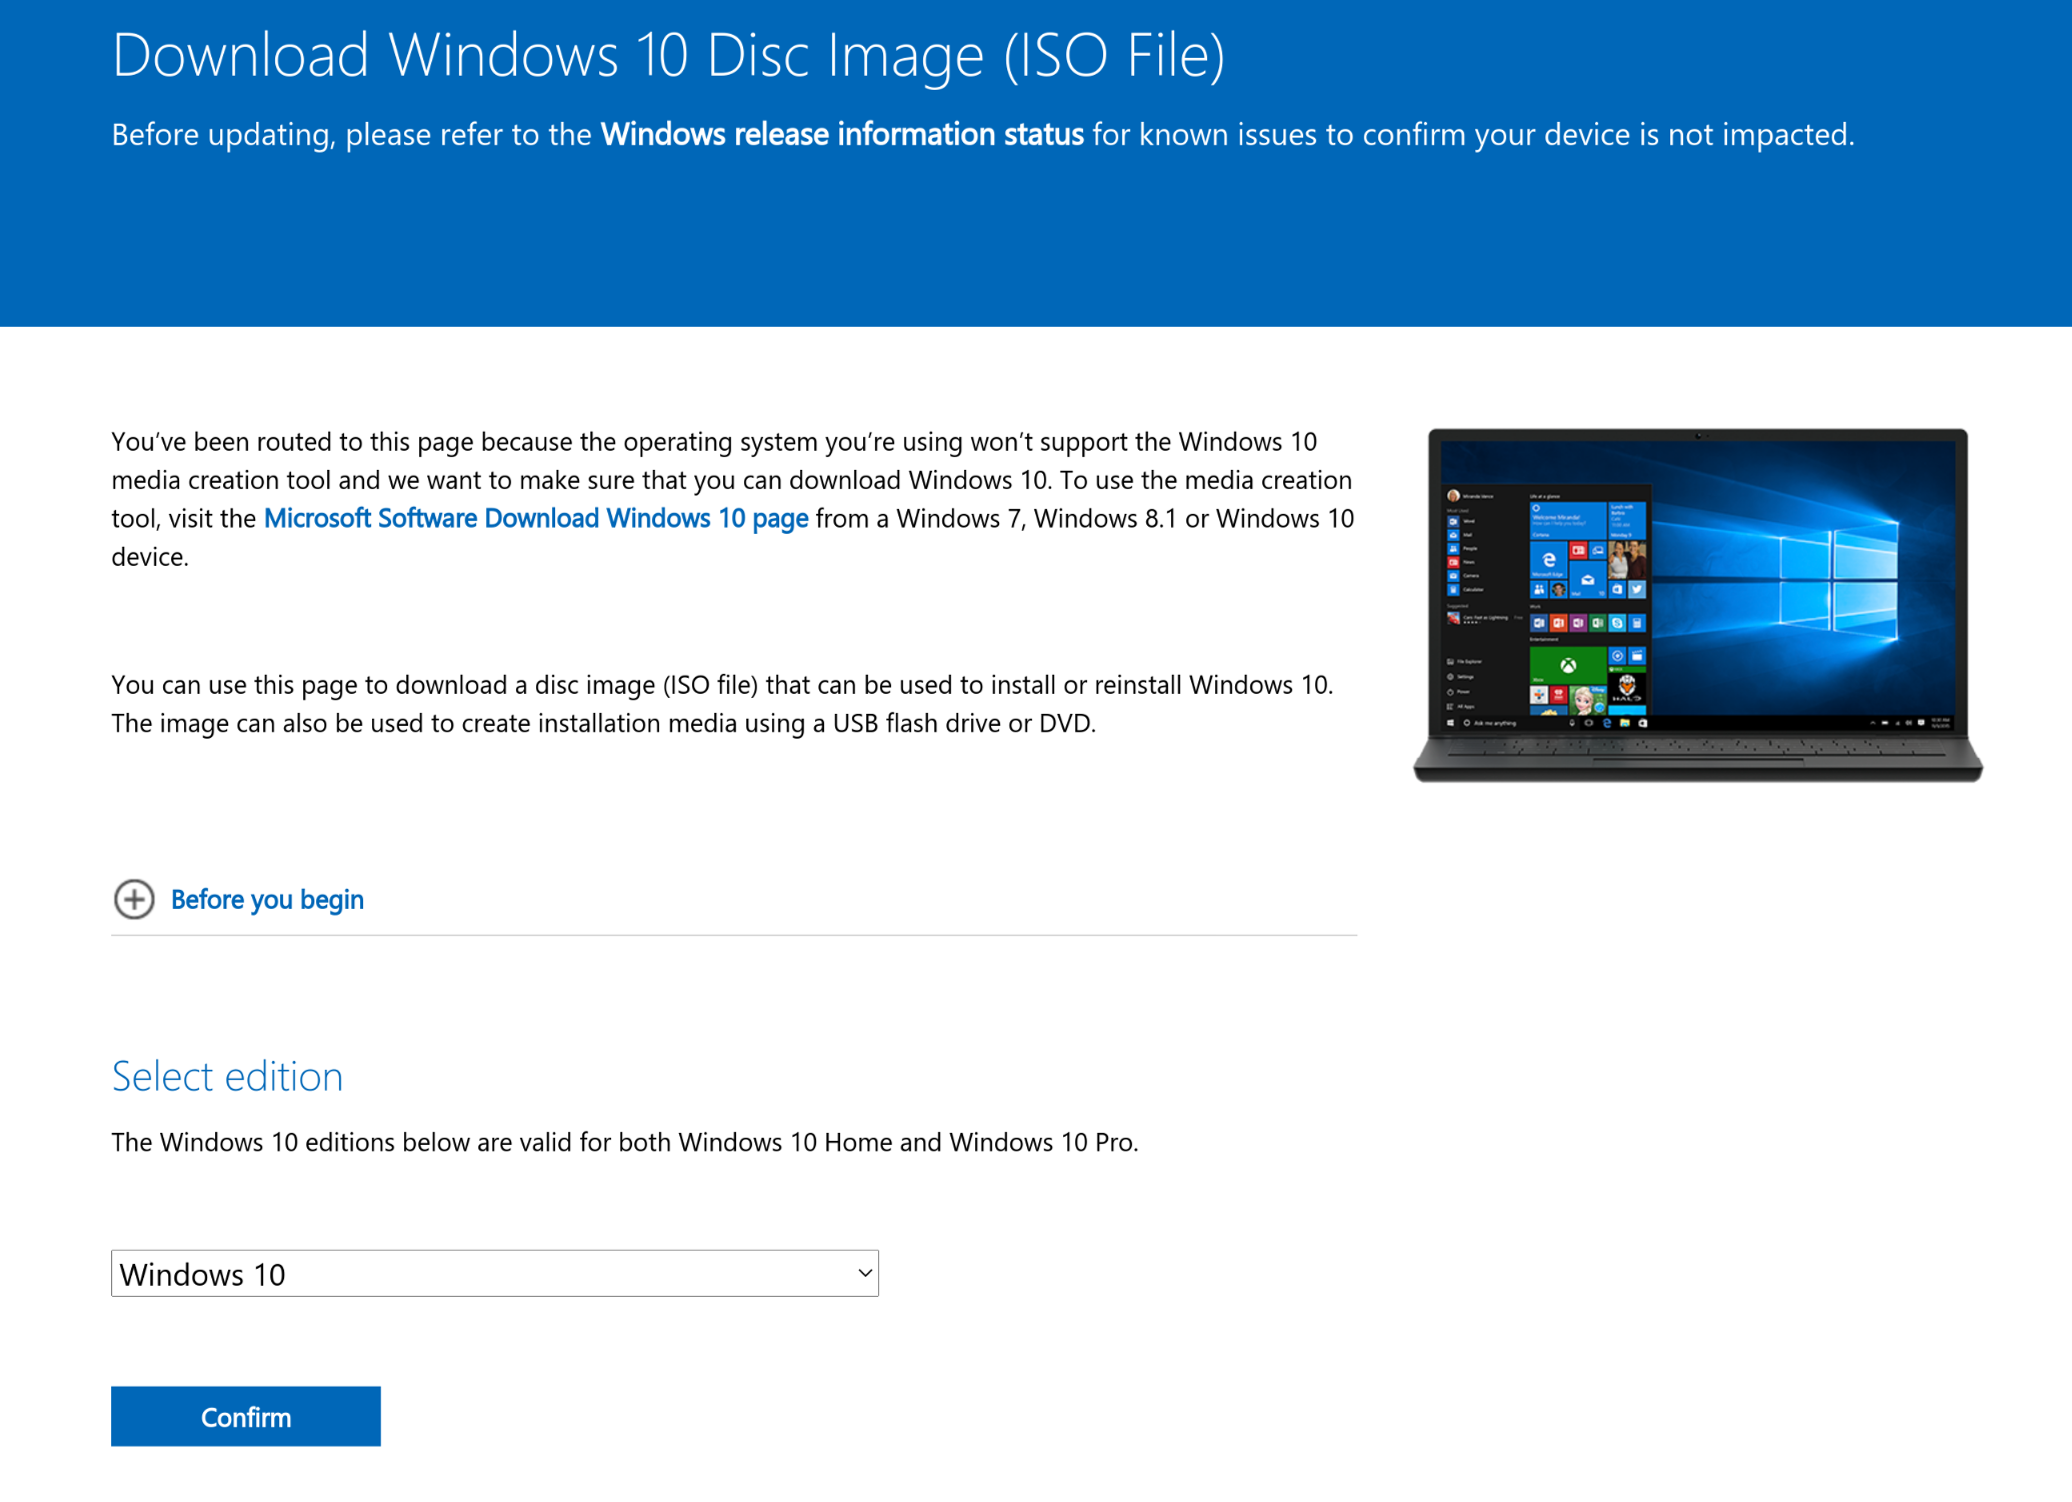 Download page screenshot for Windows 10 ISO